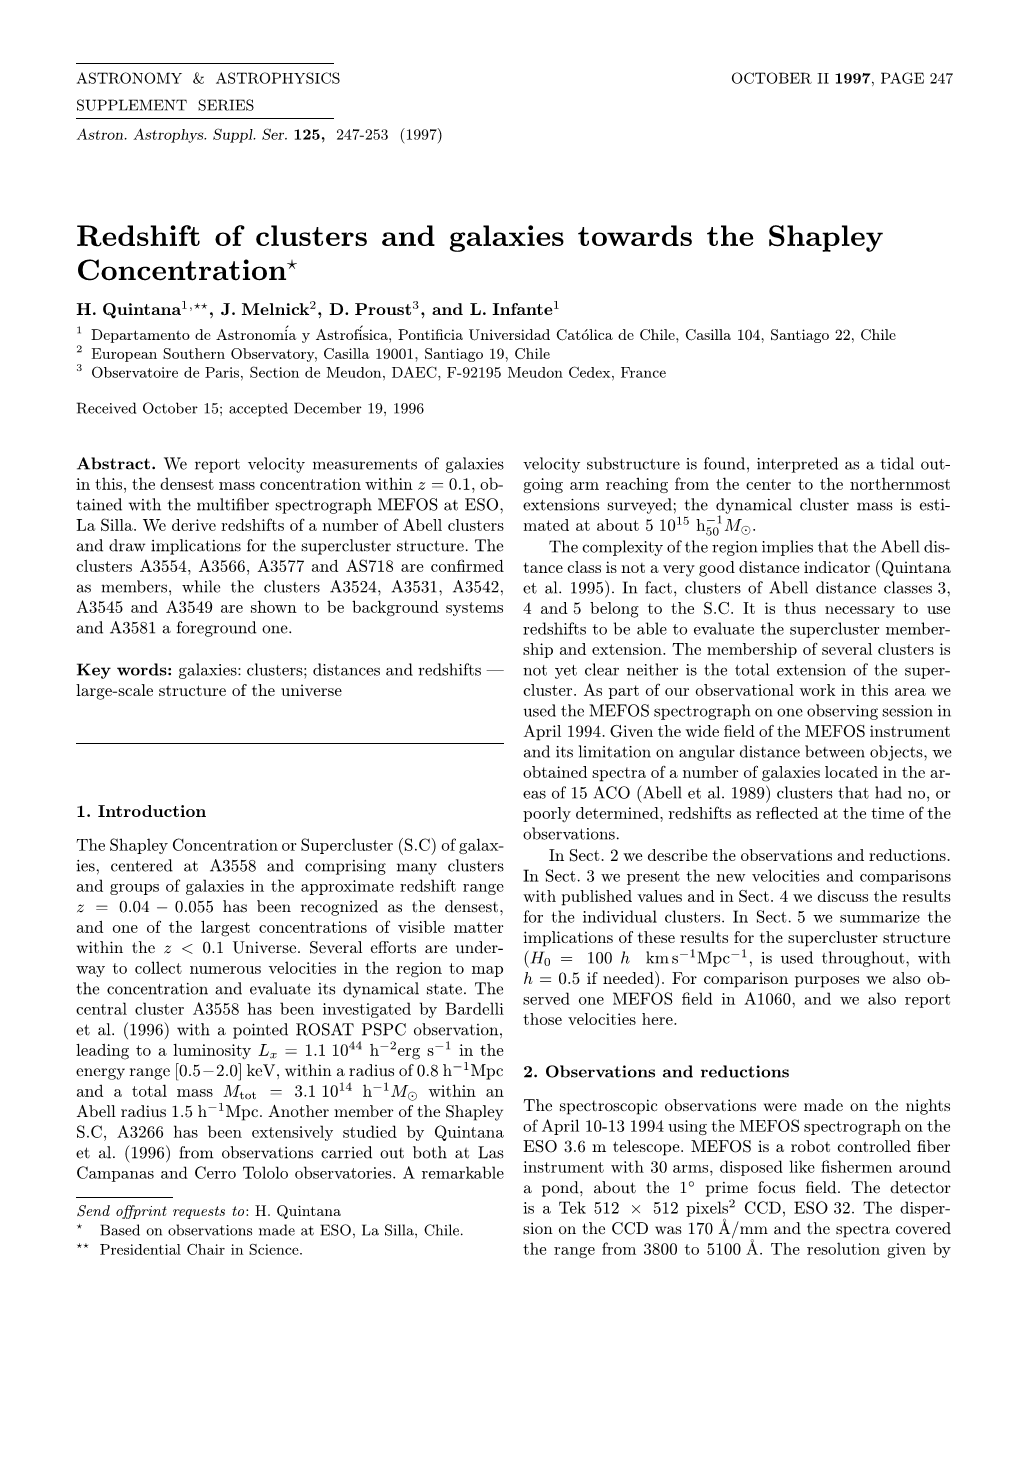 Redshift of Clusters and Galaxies Towards the Shapley Concentration? H